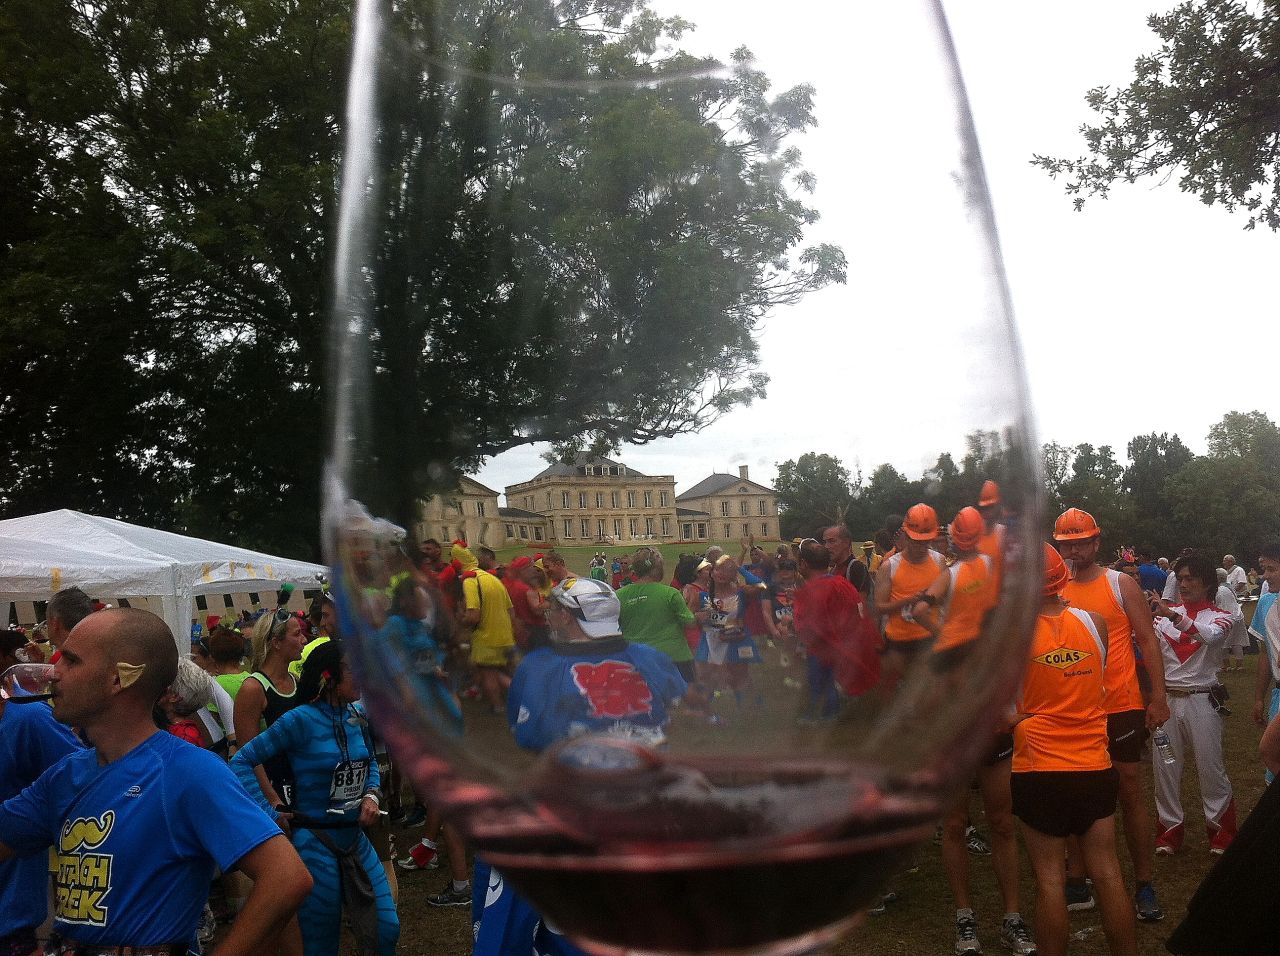 The run is nicknamed "the longest marathon in the world," in reference to the many wines on offer to sidetrack runners. Average times are far slower than usual marathons, but no one seems to care.